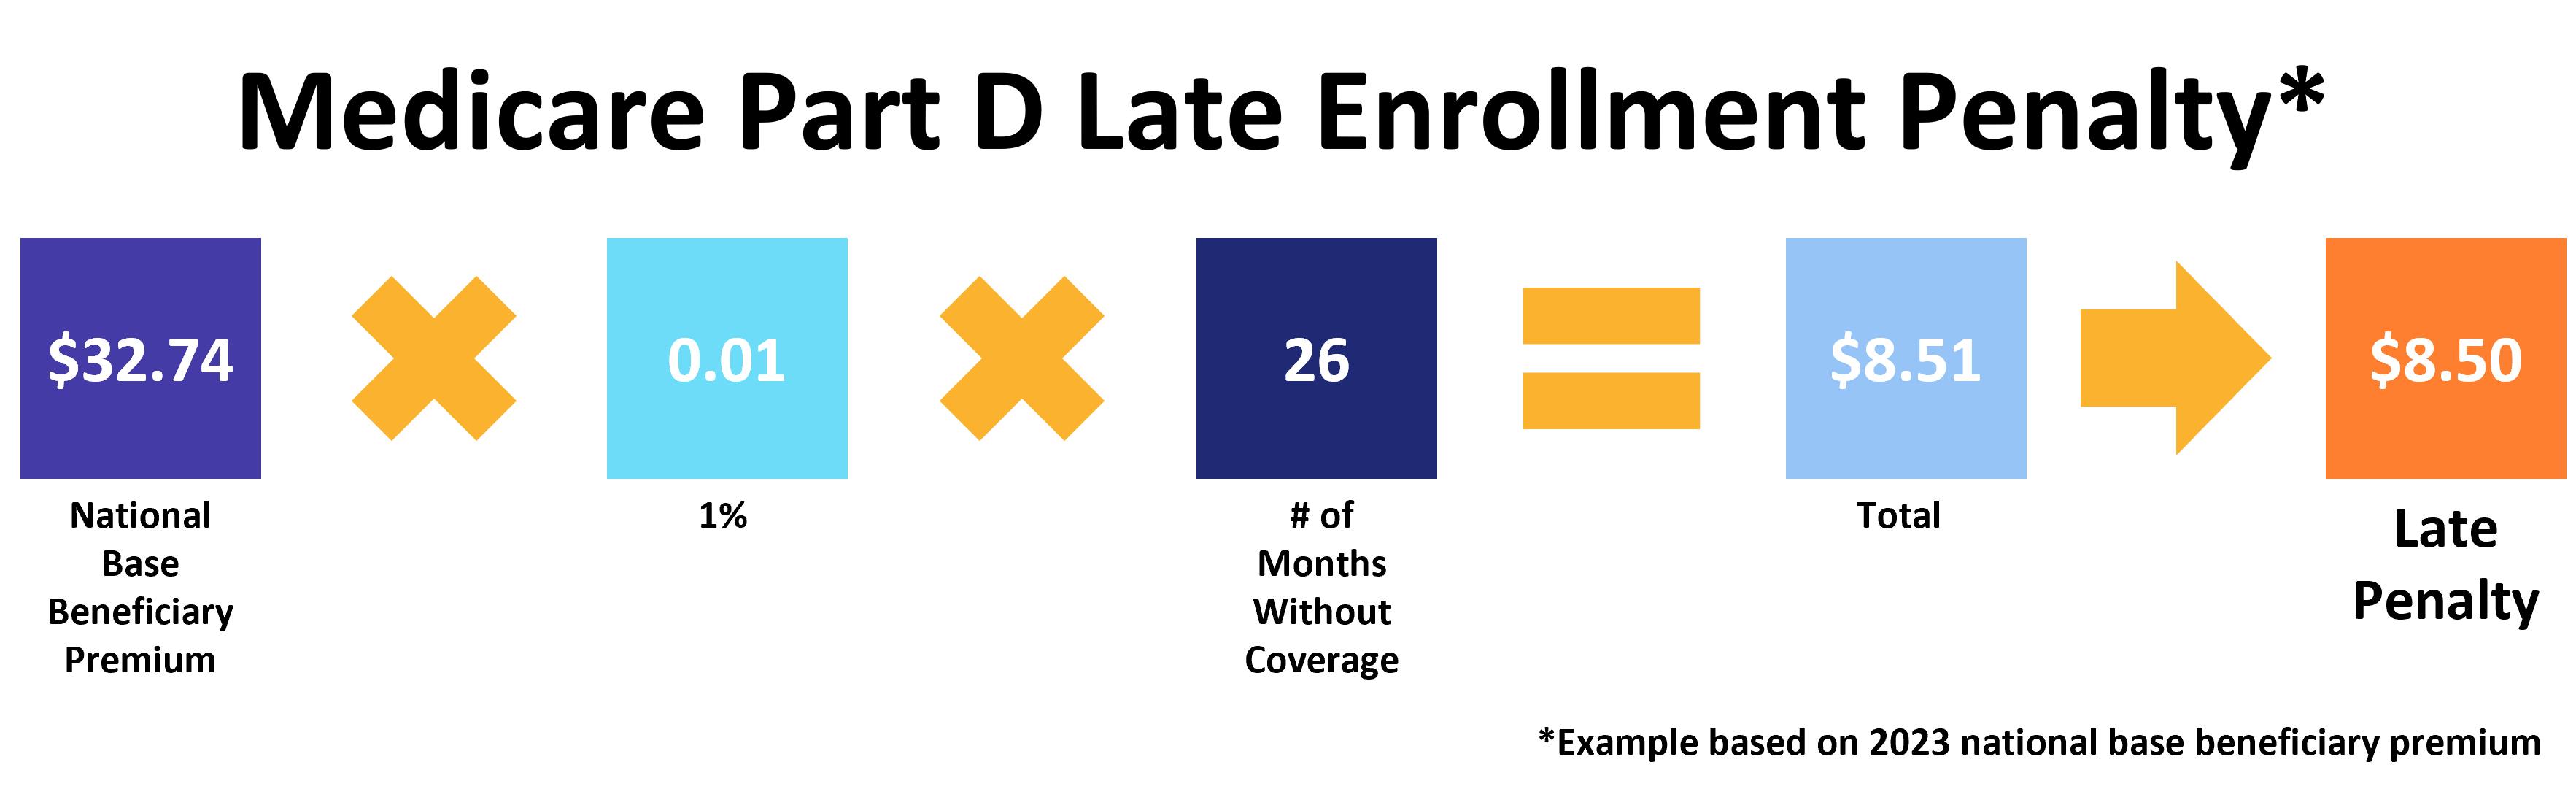 Medicare Part D late enrollment penalty in 2023